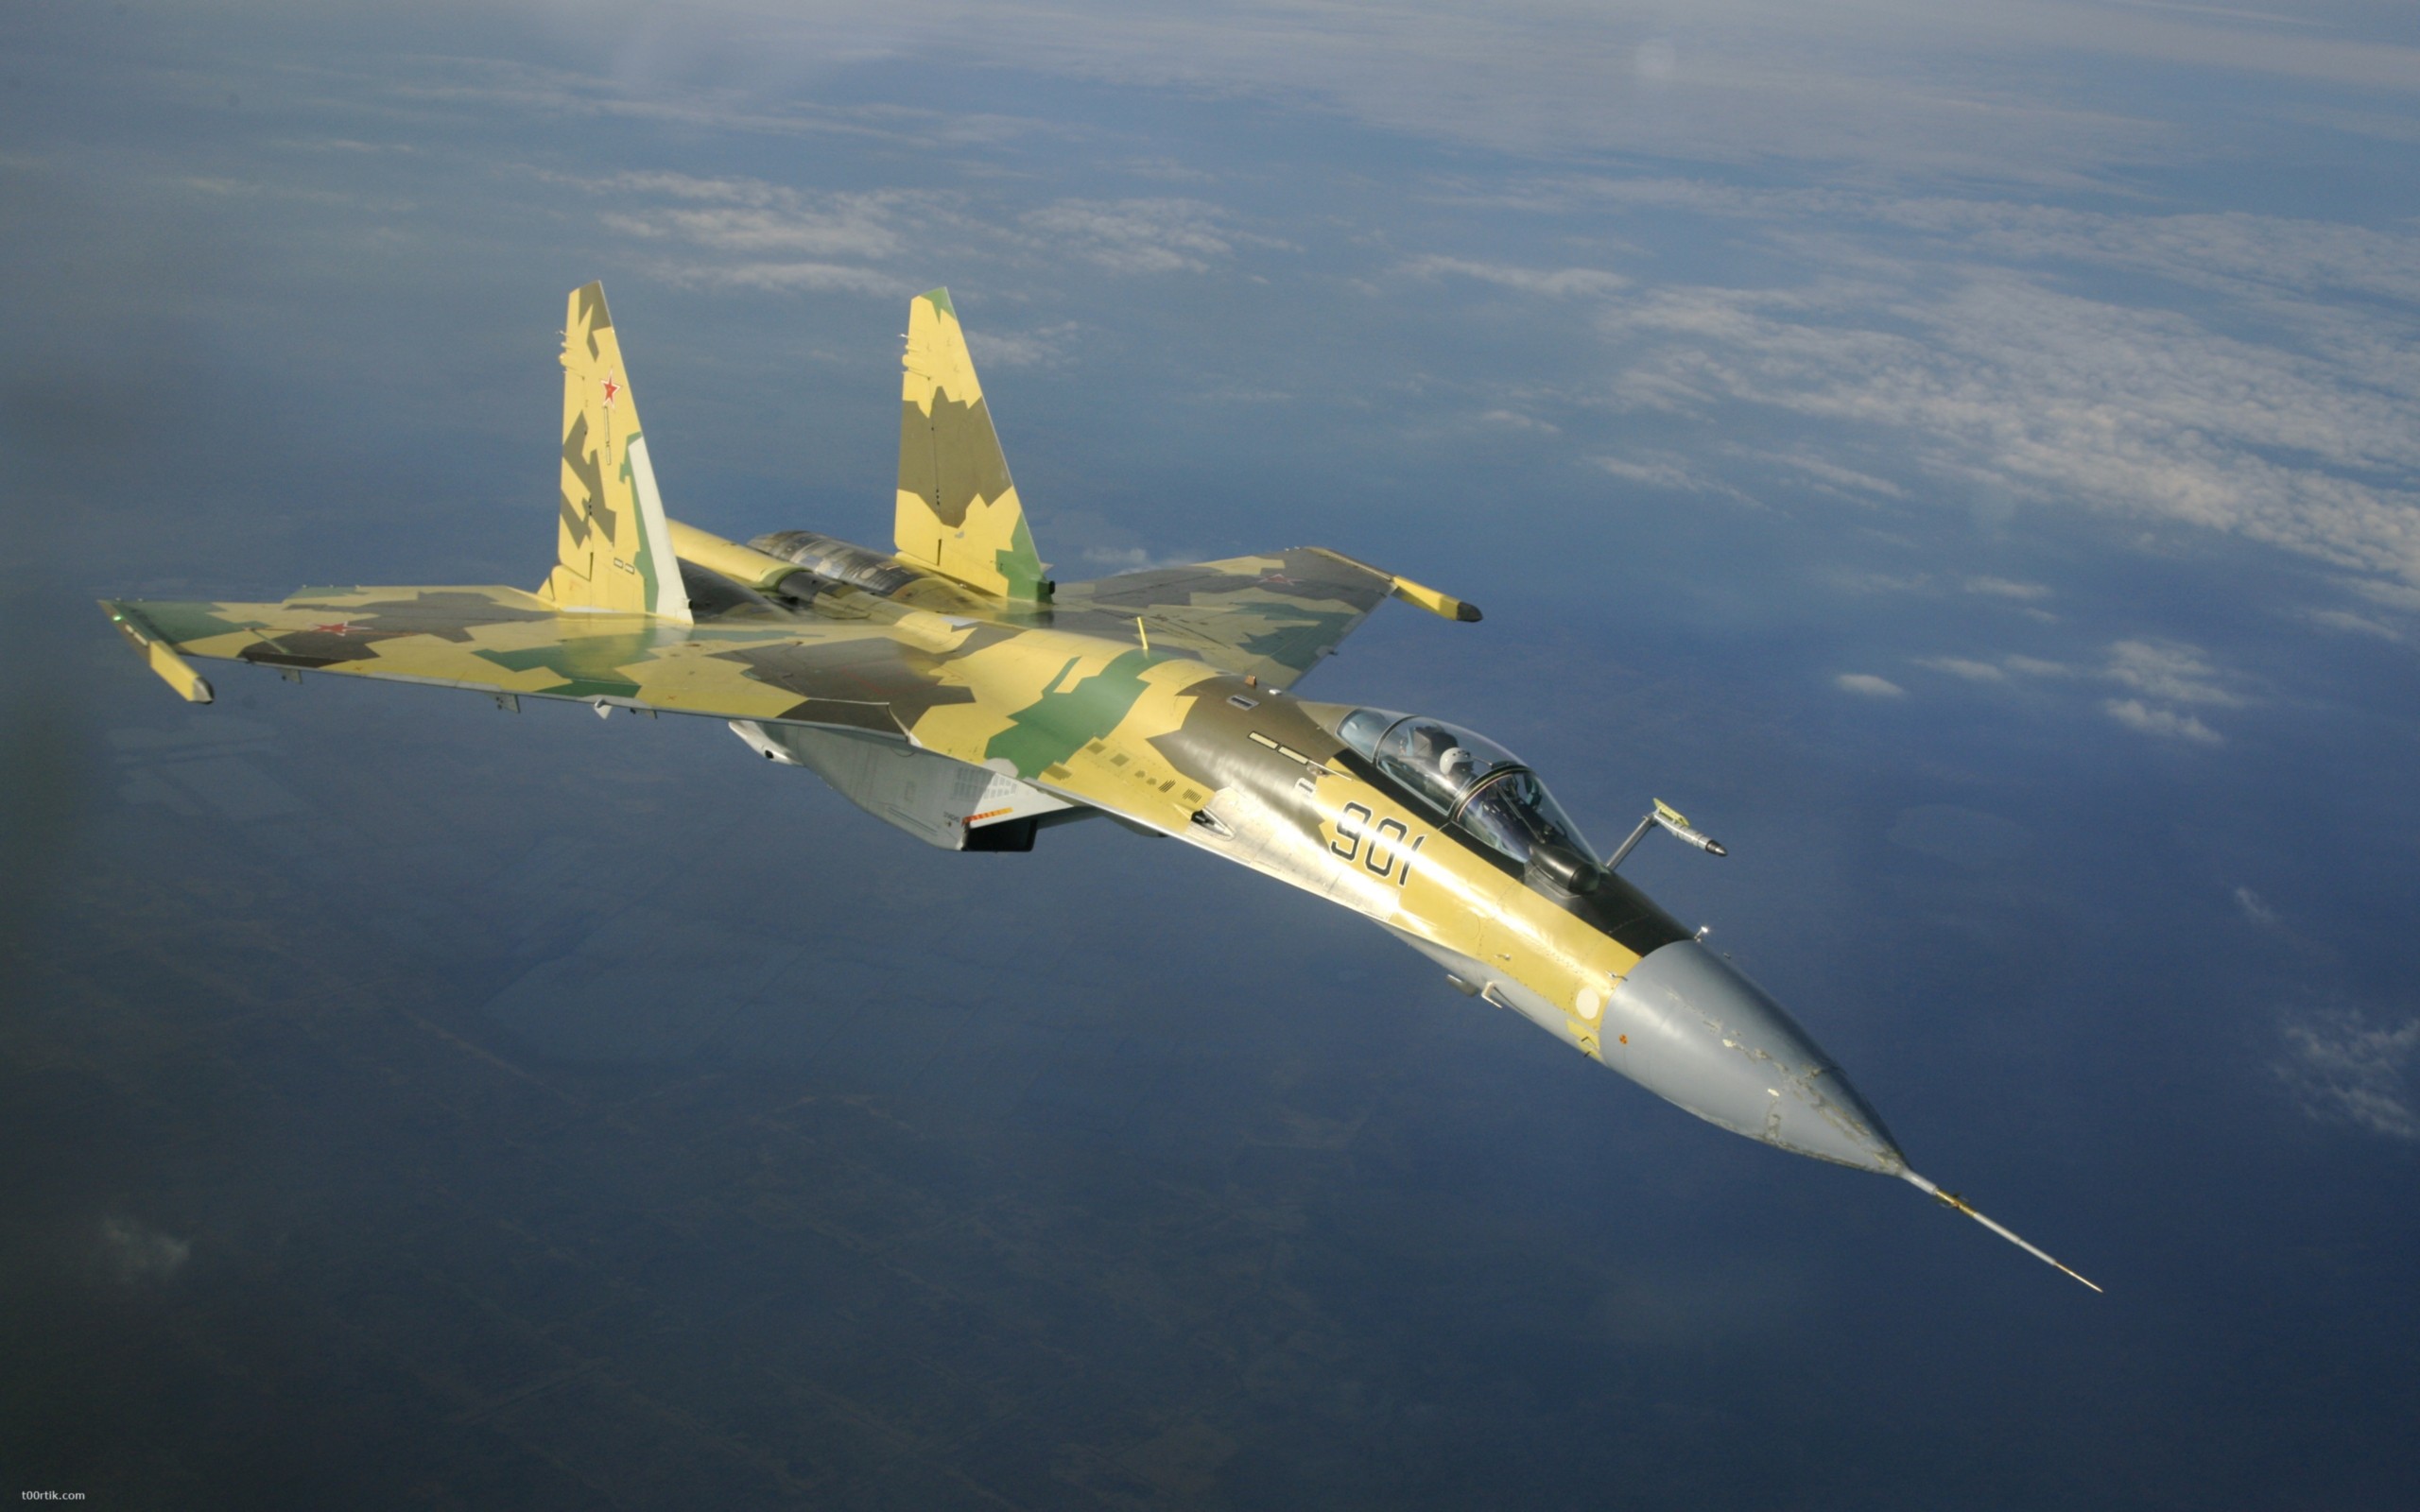 General 2560x1600 military aircraft aircraft Russian Air Force military Sukhoi Su-35 jet fighter Sukhoi vehicle military vehicle Russian/Soviet aircraft